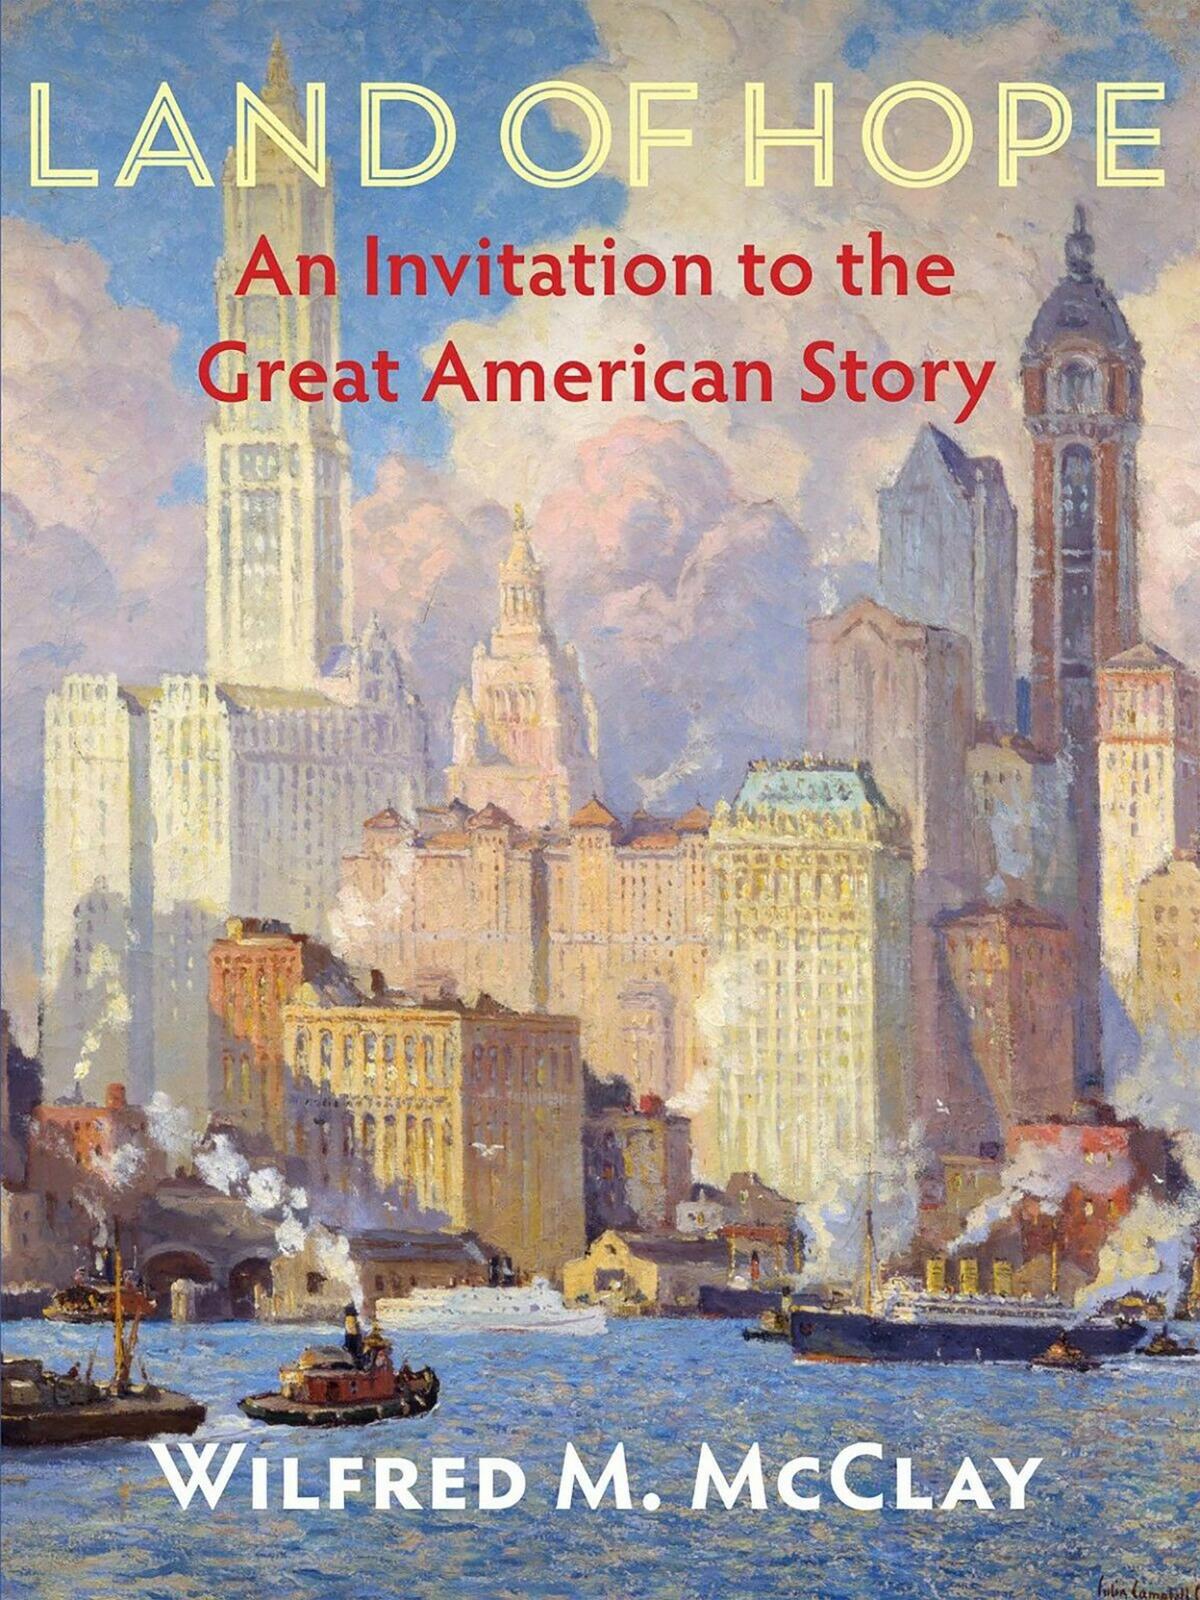 Wilfred McClay's textbook uses a story form, instead of all facts and figures to bring America's history to life.